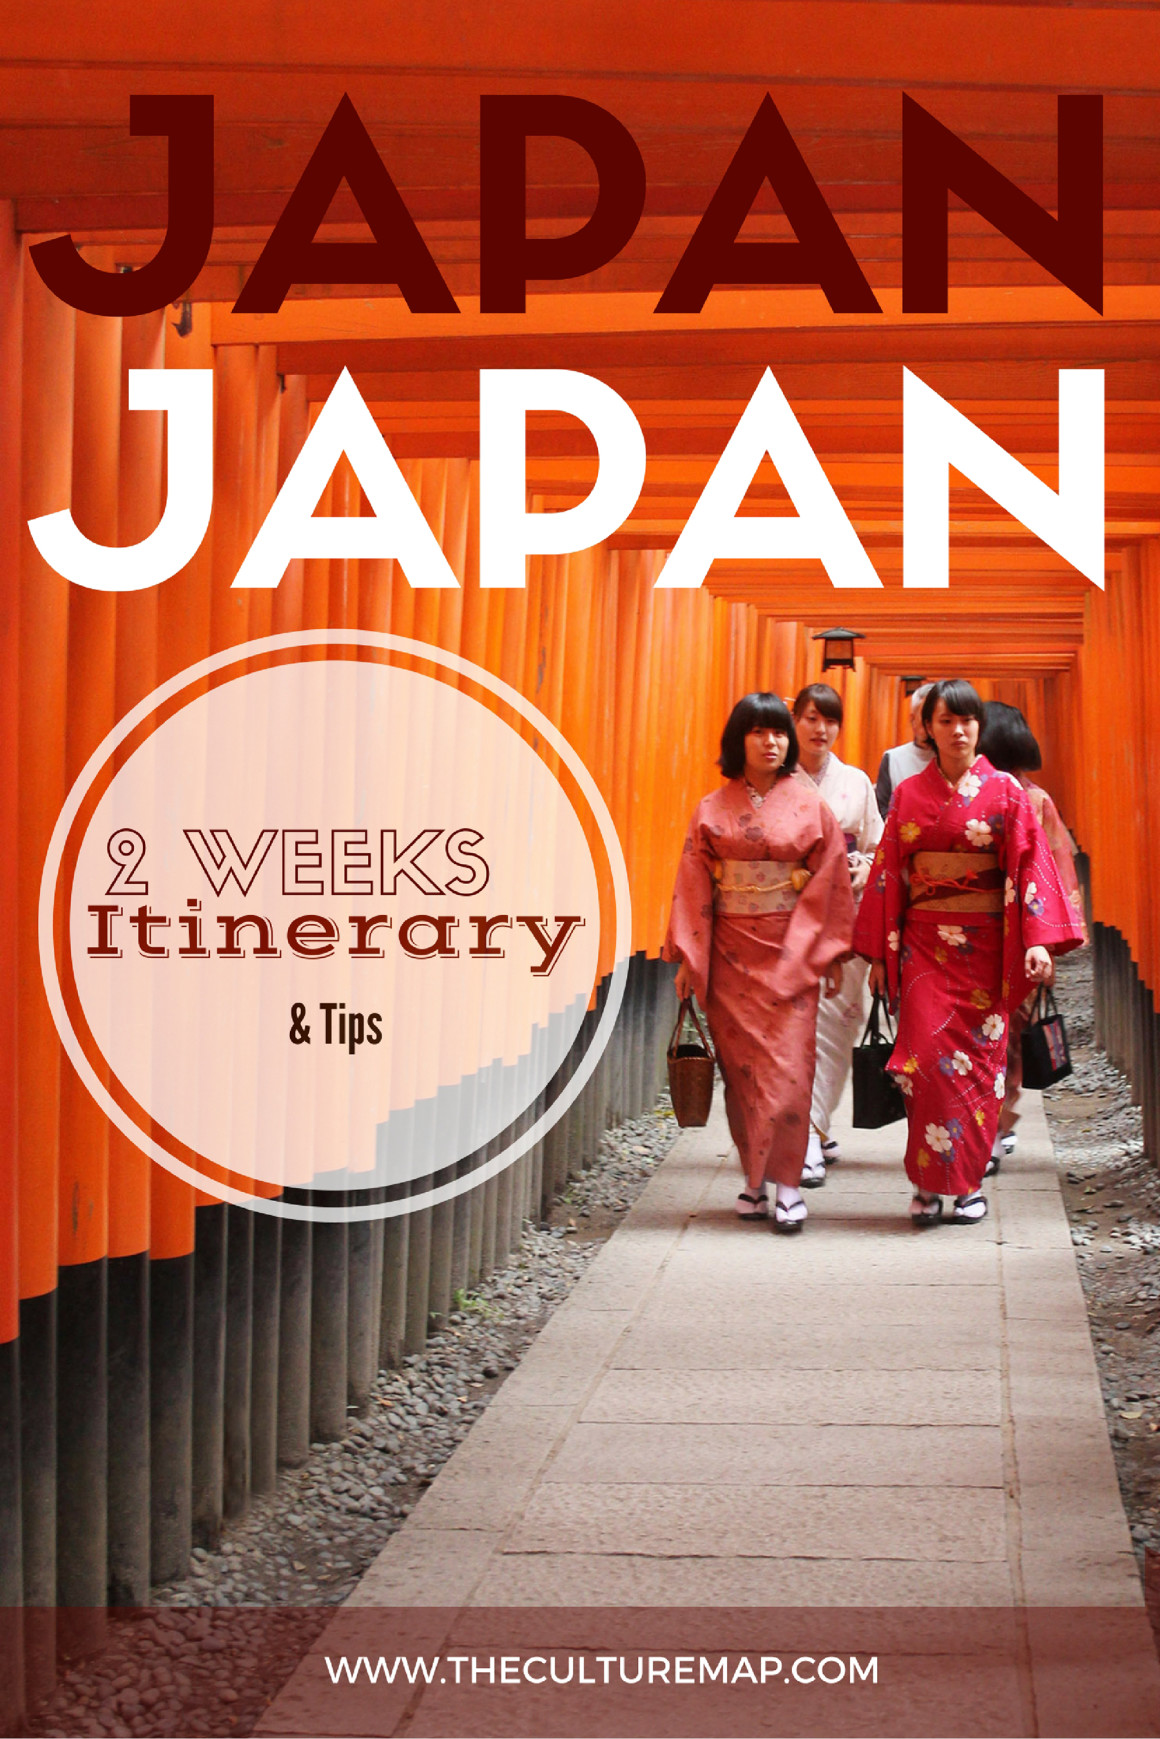 Exploring Japan in 2 weeks - travel itinerary packed with tips, recommendations and photos